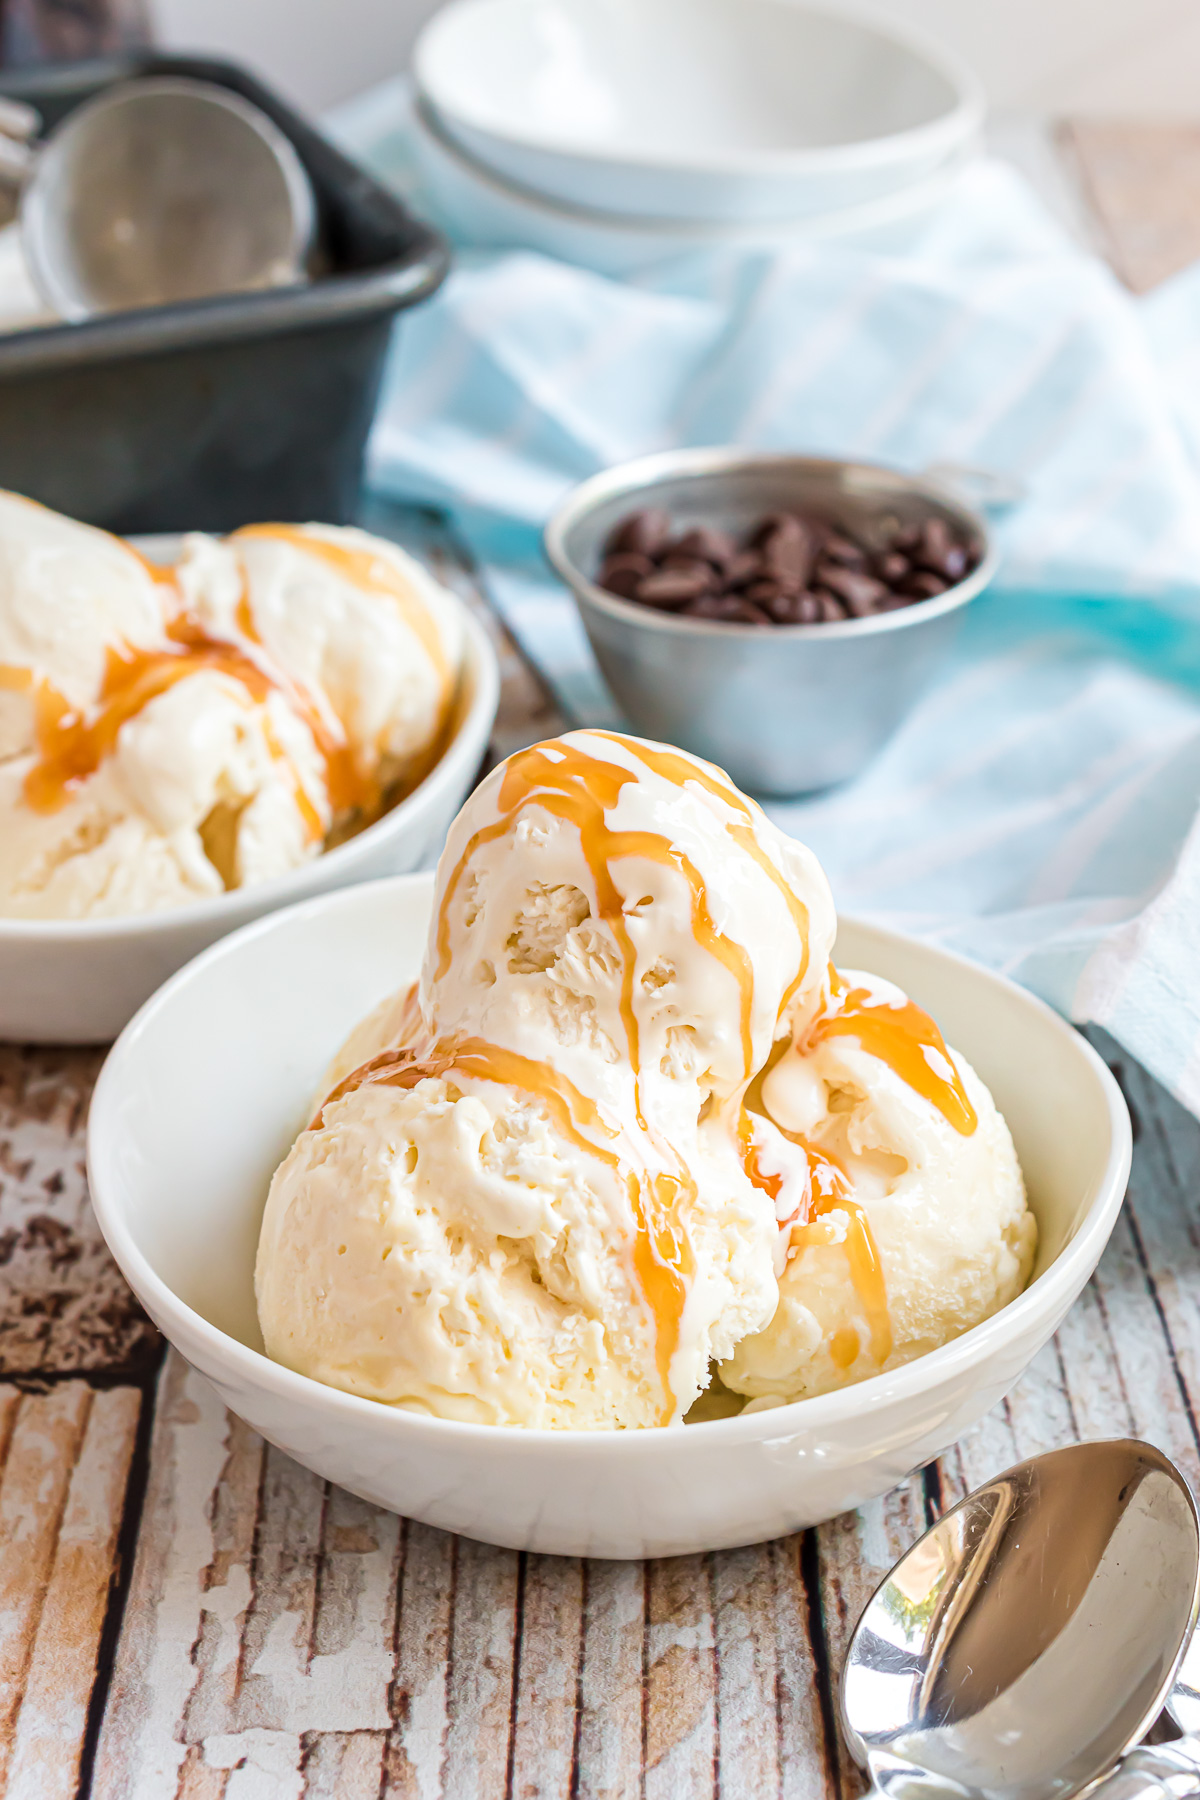 A white ceramic bowl with three large scoops of vanilla ice cream in it. The ice cream is drizzled with caramel sauce and the ice cream is melting and creamy.